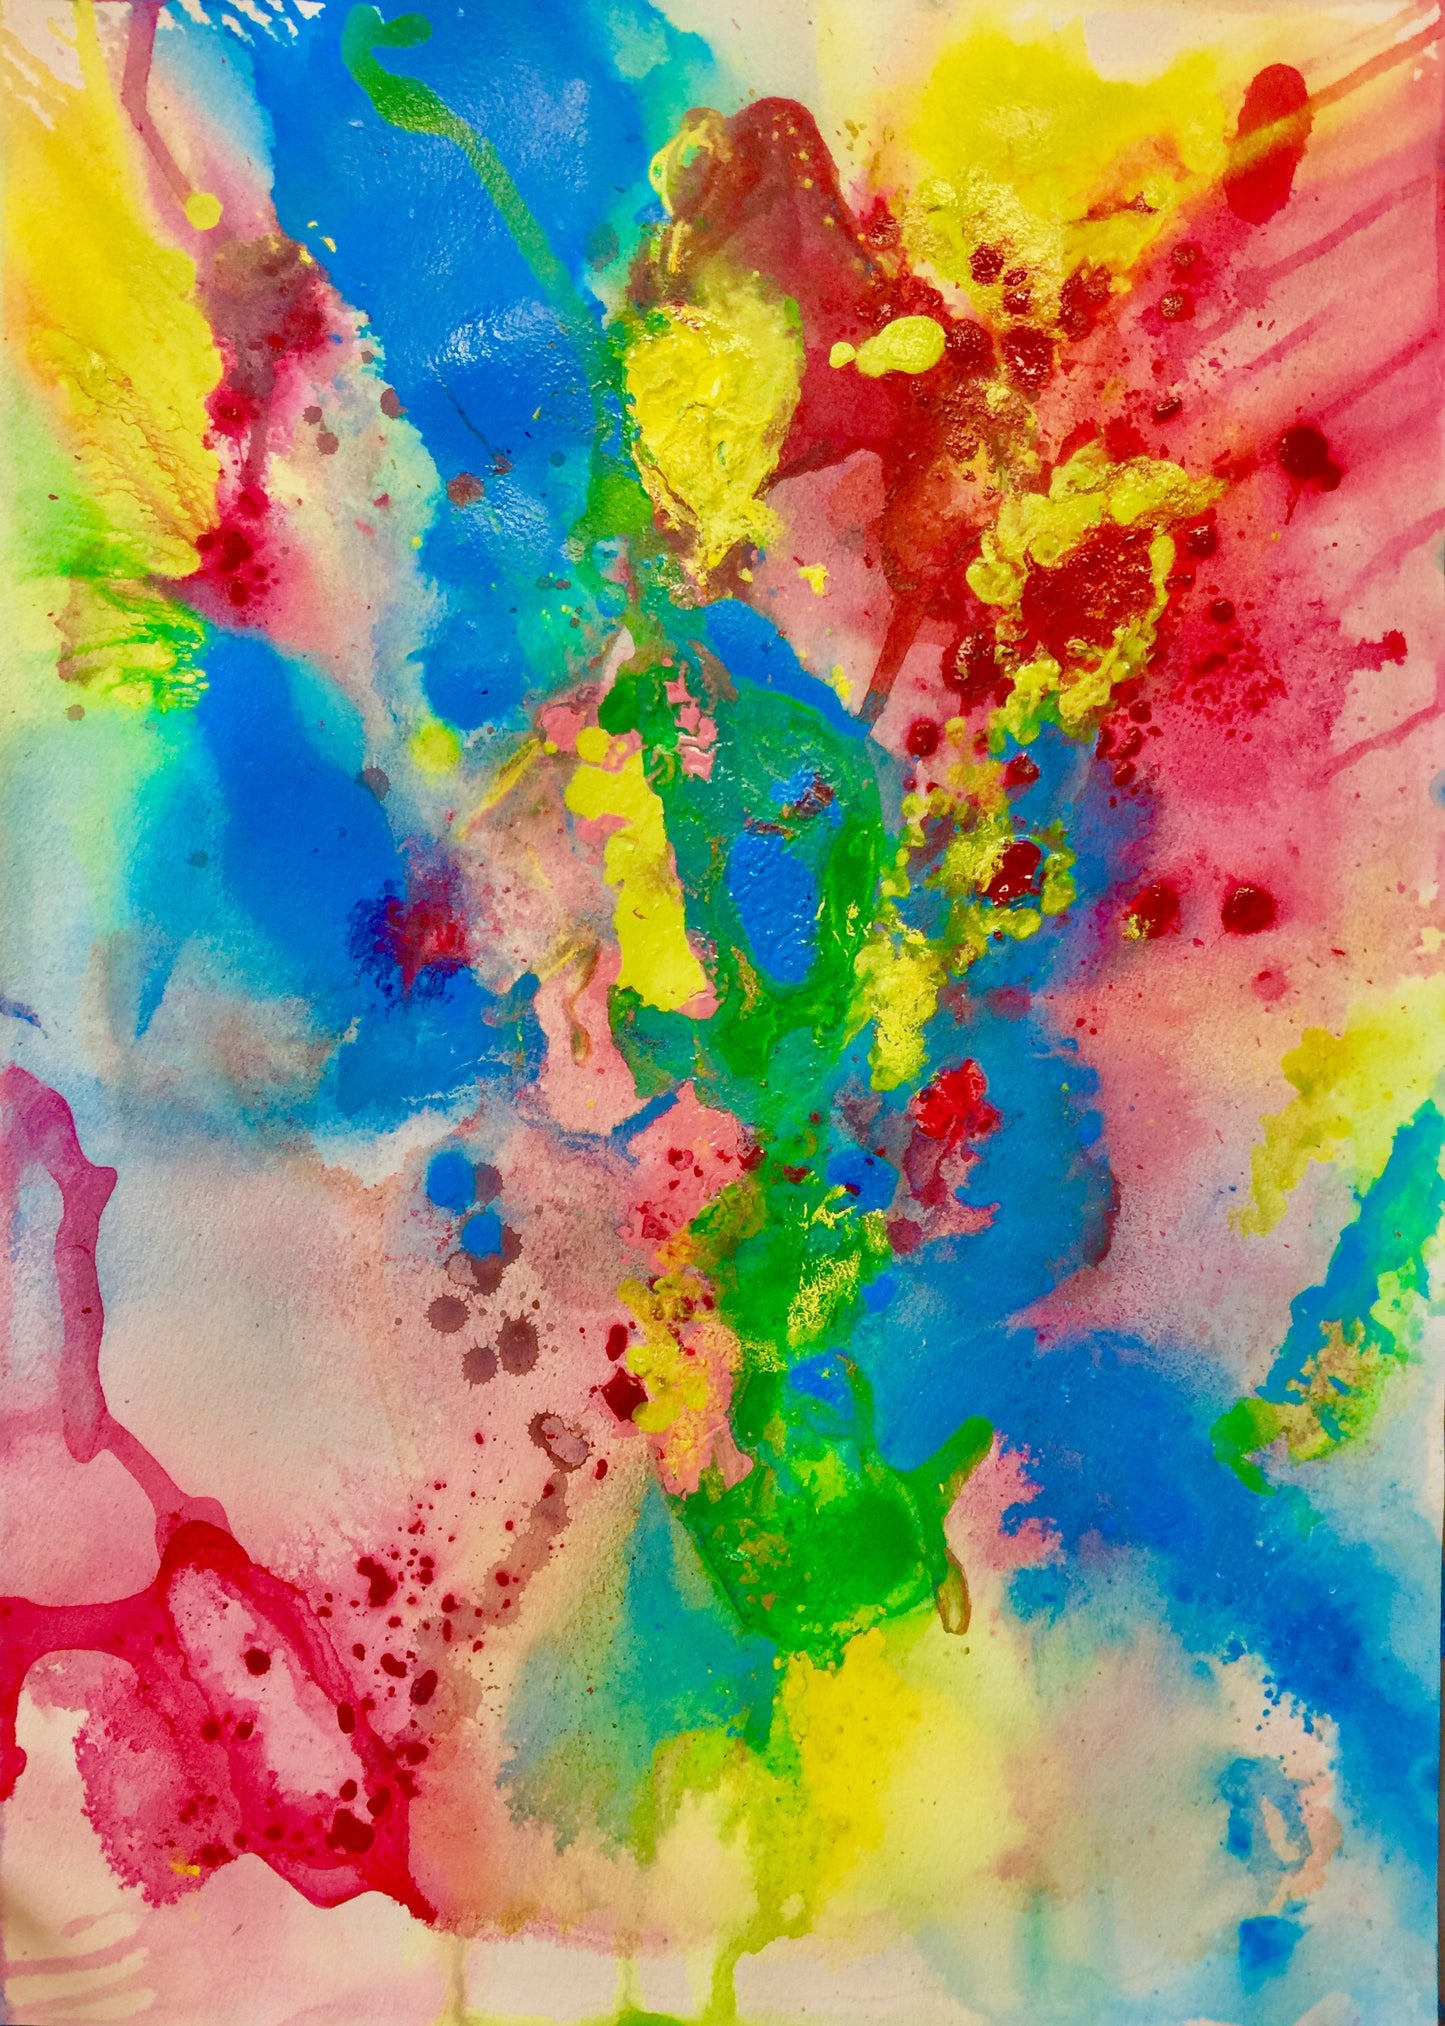 Feel The Excitement - Sonarta.com As you go through life, Feel The Excitement coming from your surroundings, listen to it, move with it because It has an energy of its own!!!  Feel The Excitement painting is an Acrylic on Paper by Shahla Rahimi  Reynolds.  It is  29” H X 21” W.